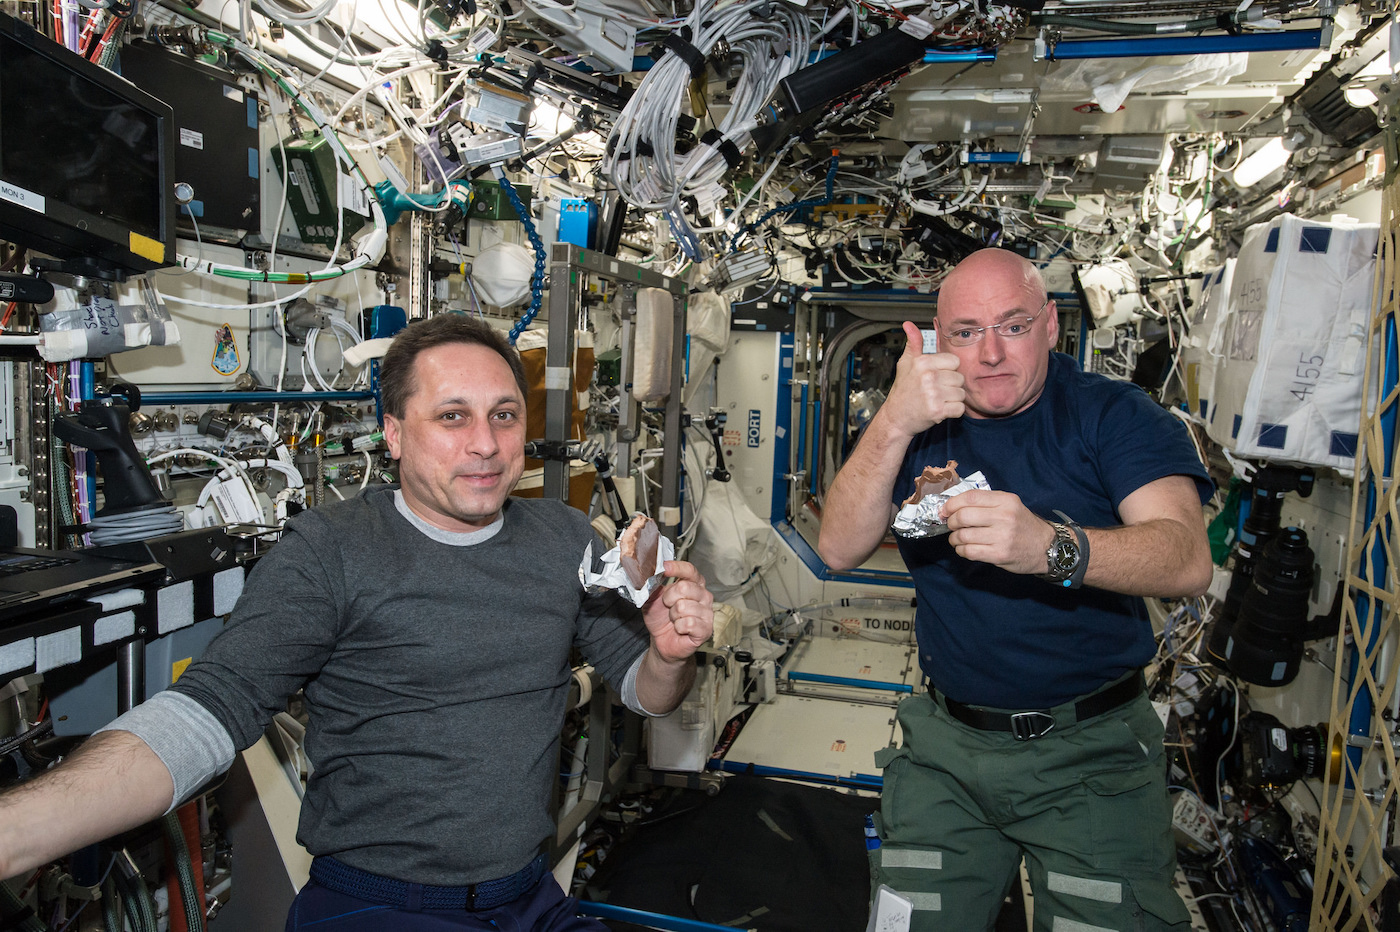 two men float in 0 gravity aboard the international space station, in a room full of pipes and wiring.